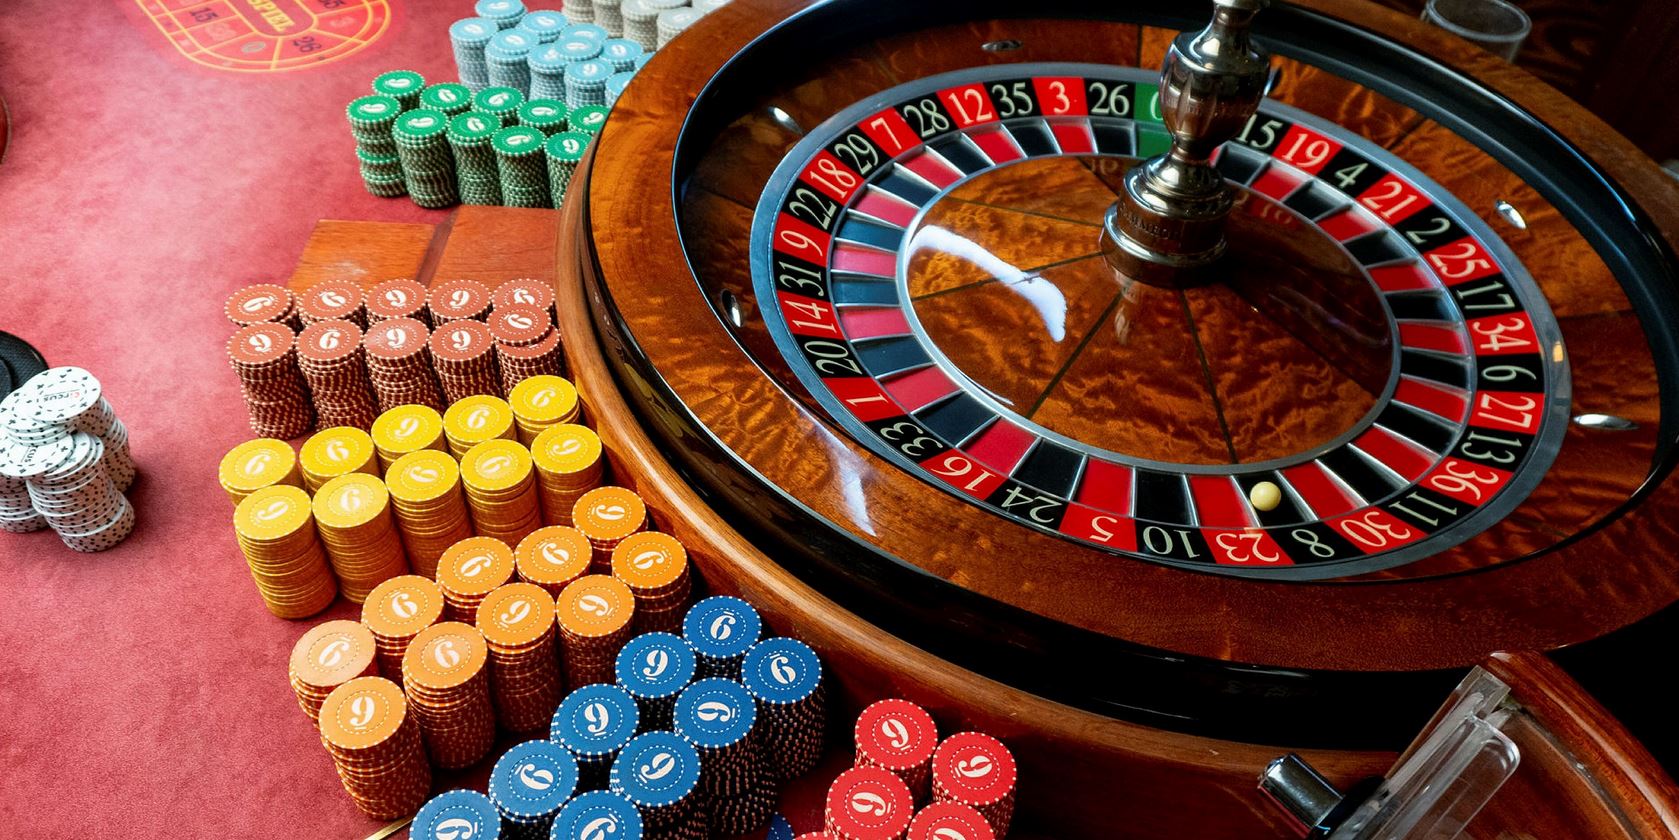 7 Strange Facts About more live casino sites